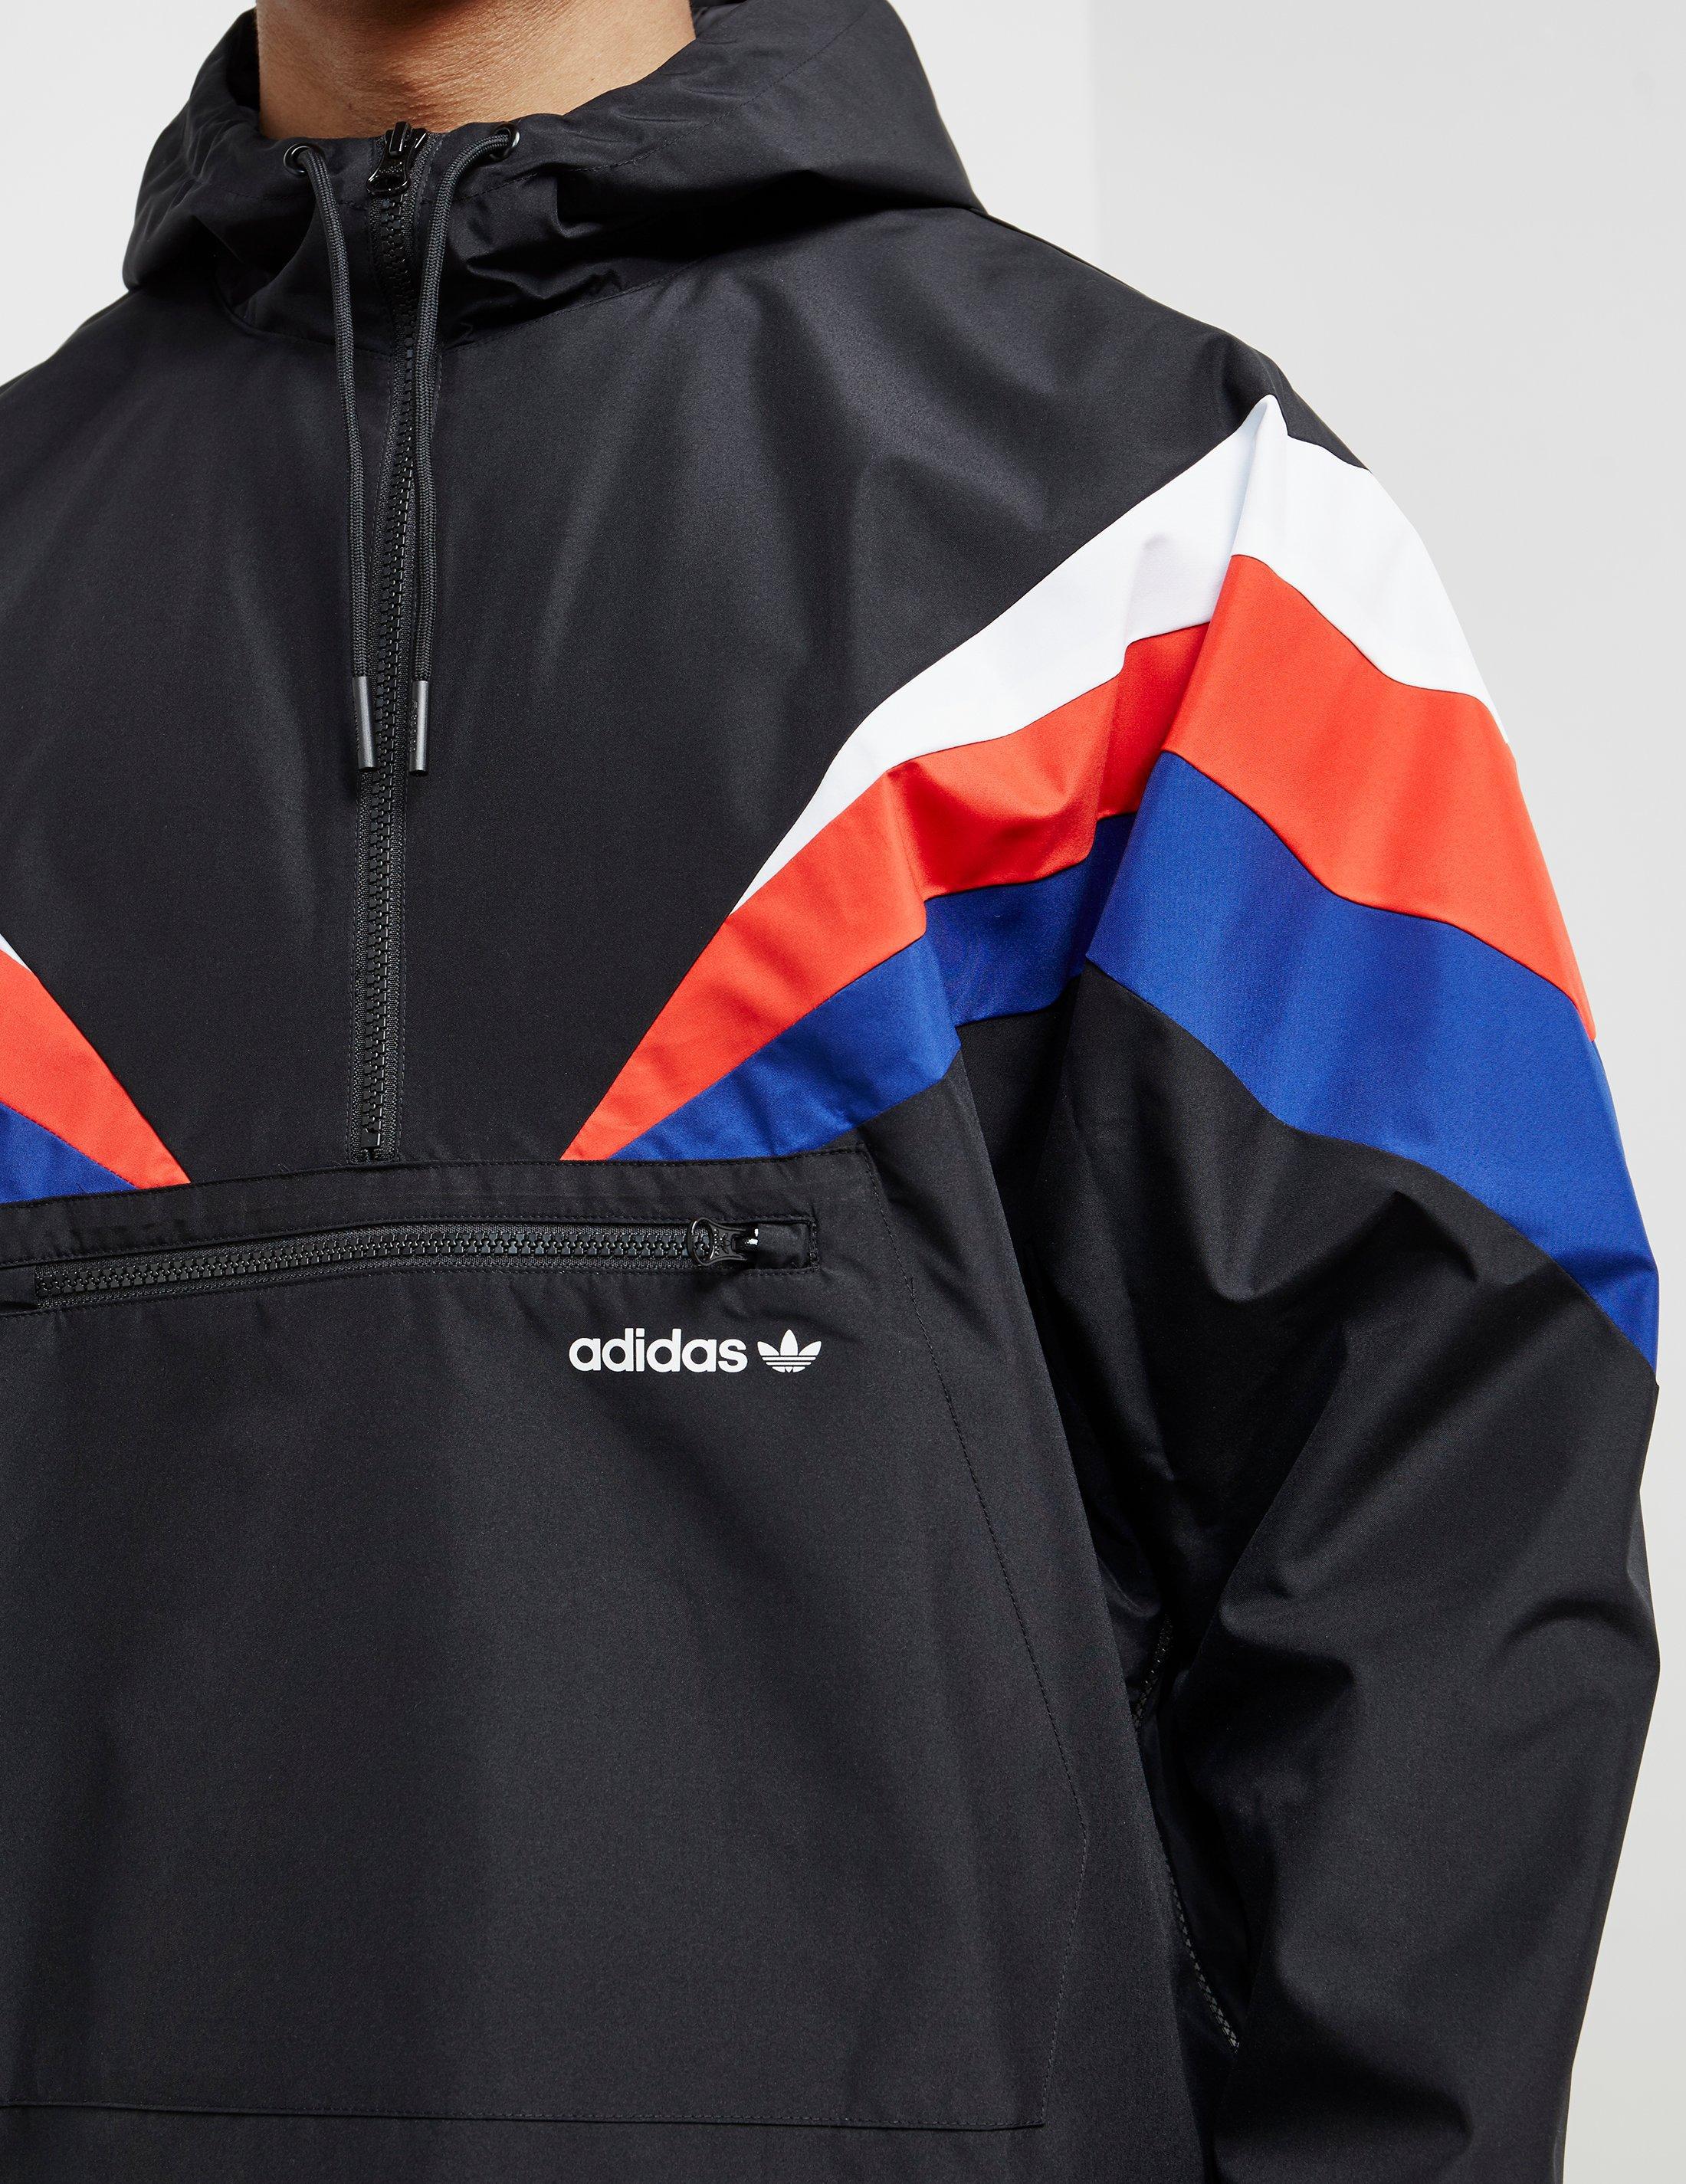 blue and red adidas jacket